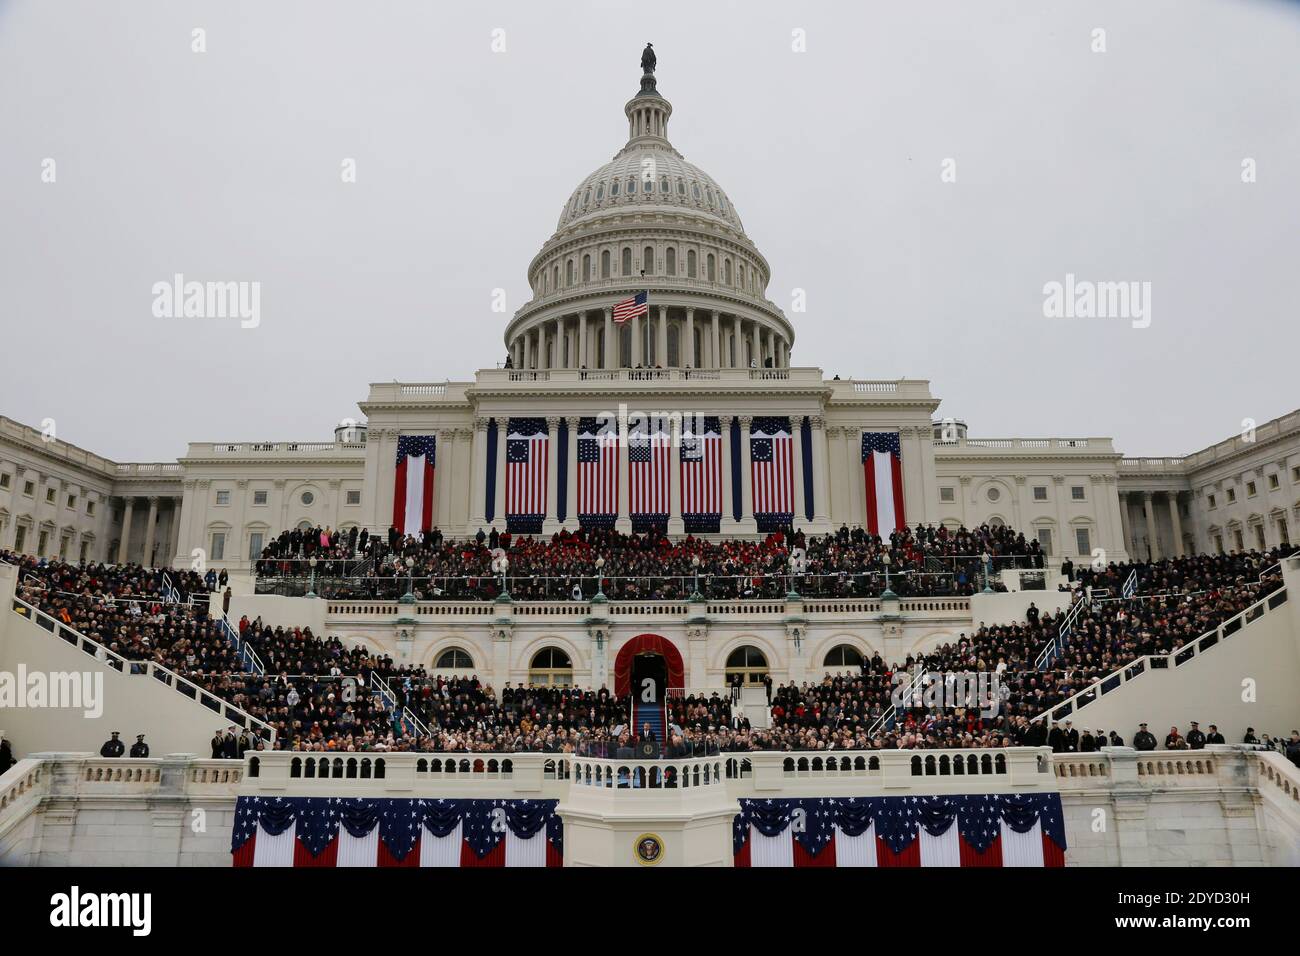 President Barack Obama speaks during the ceremonial swearing-in at the U.S. Capitol during the 57th Presidential Inauguration in Washington on January 21, 2013. Photo by Scott Andrews/Pool/ABACAPRESS.COM Stock Photo